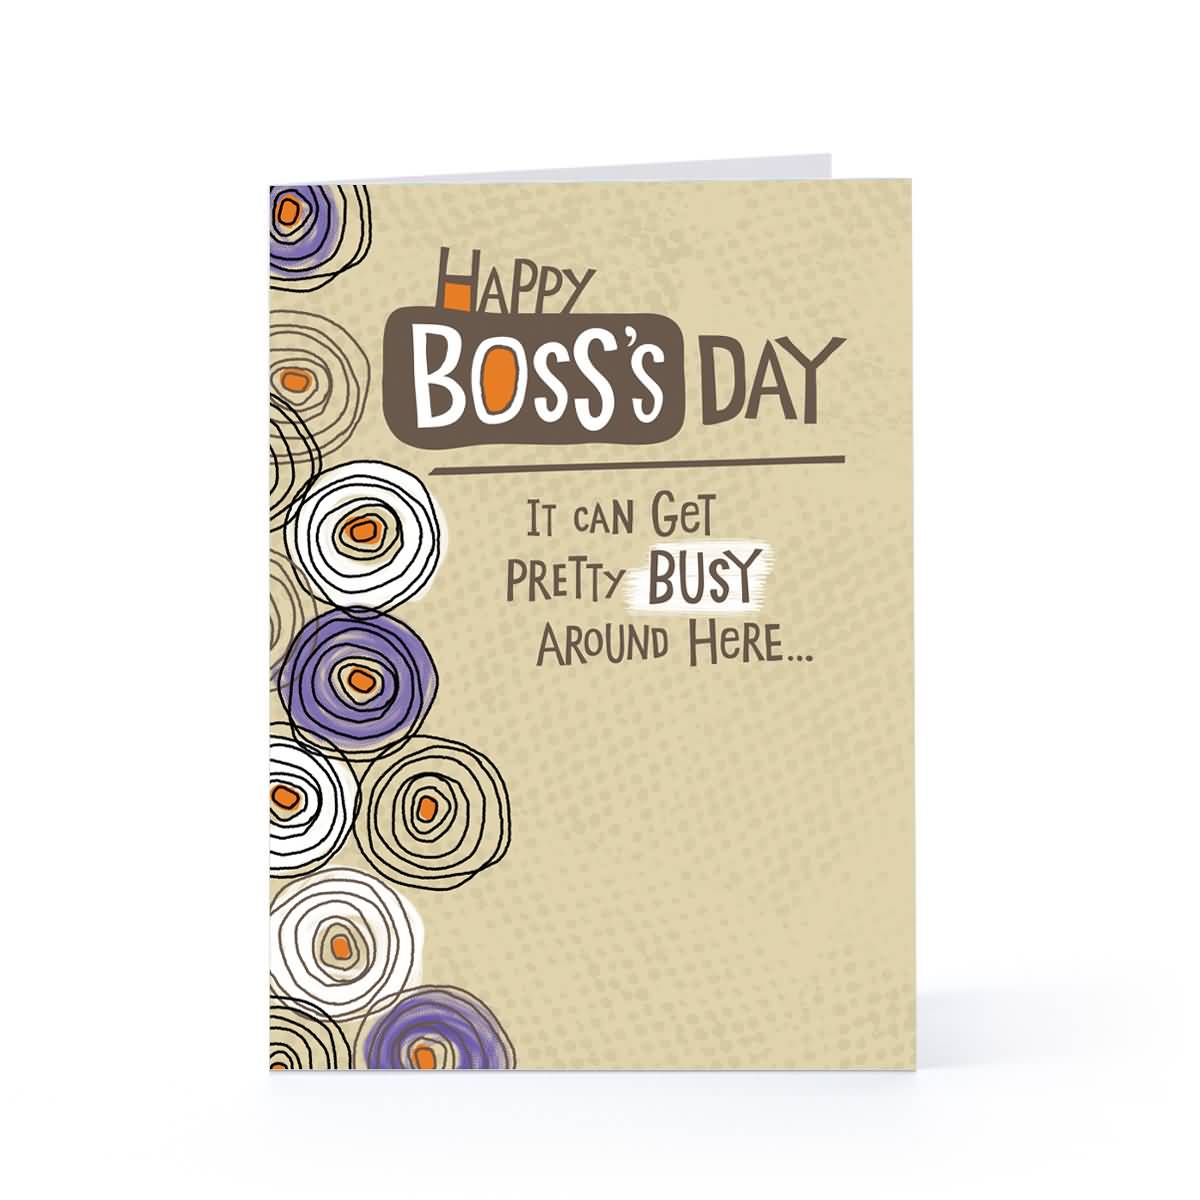 Happy Boss's Day It Can Get Pretty Busy Around Here Greeting Card